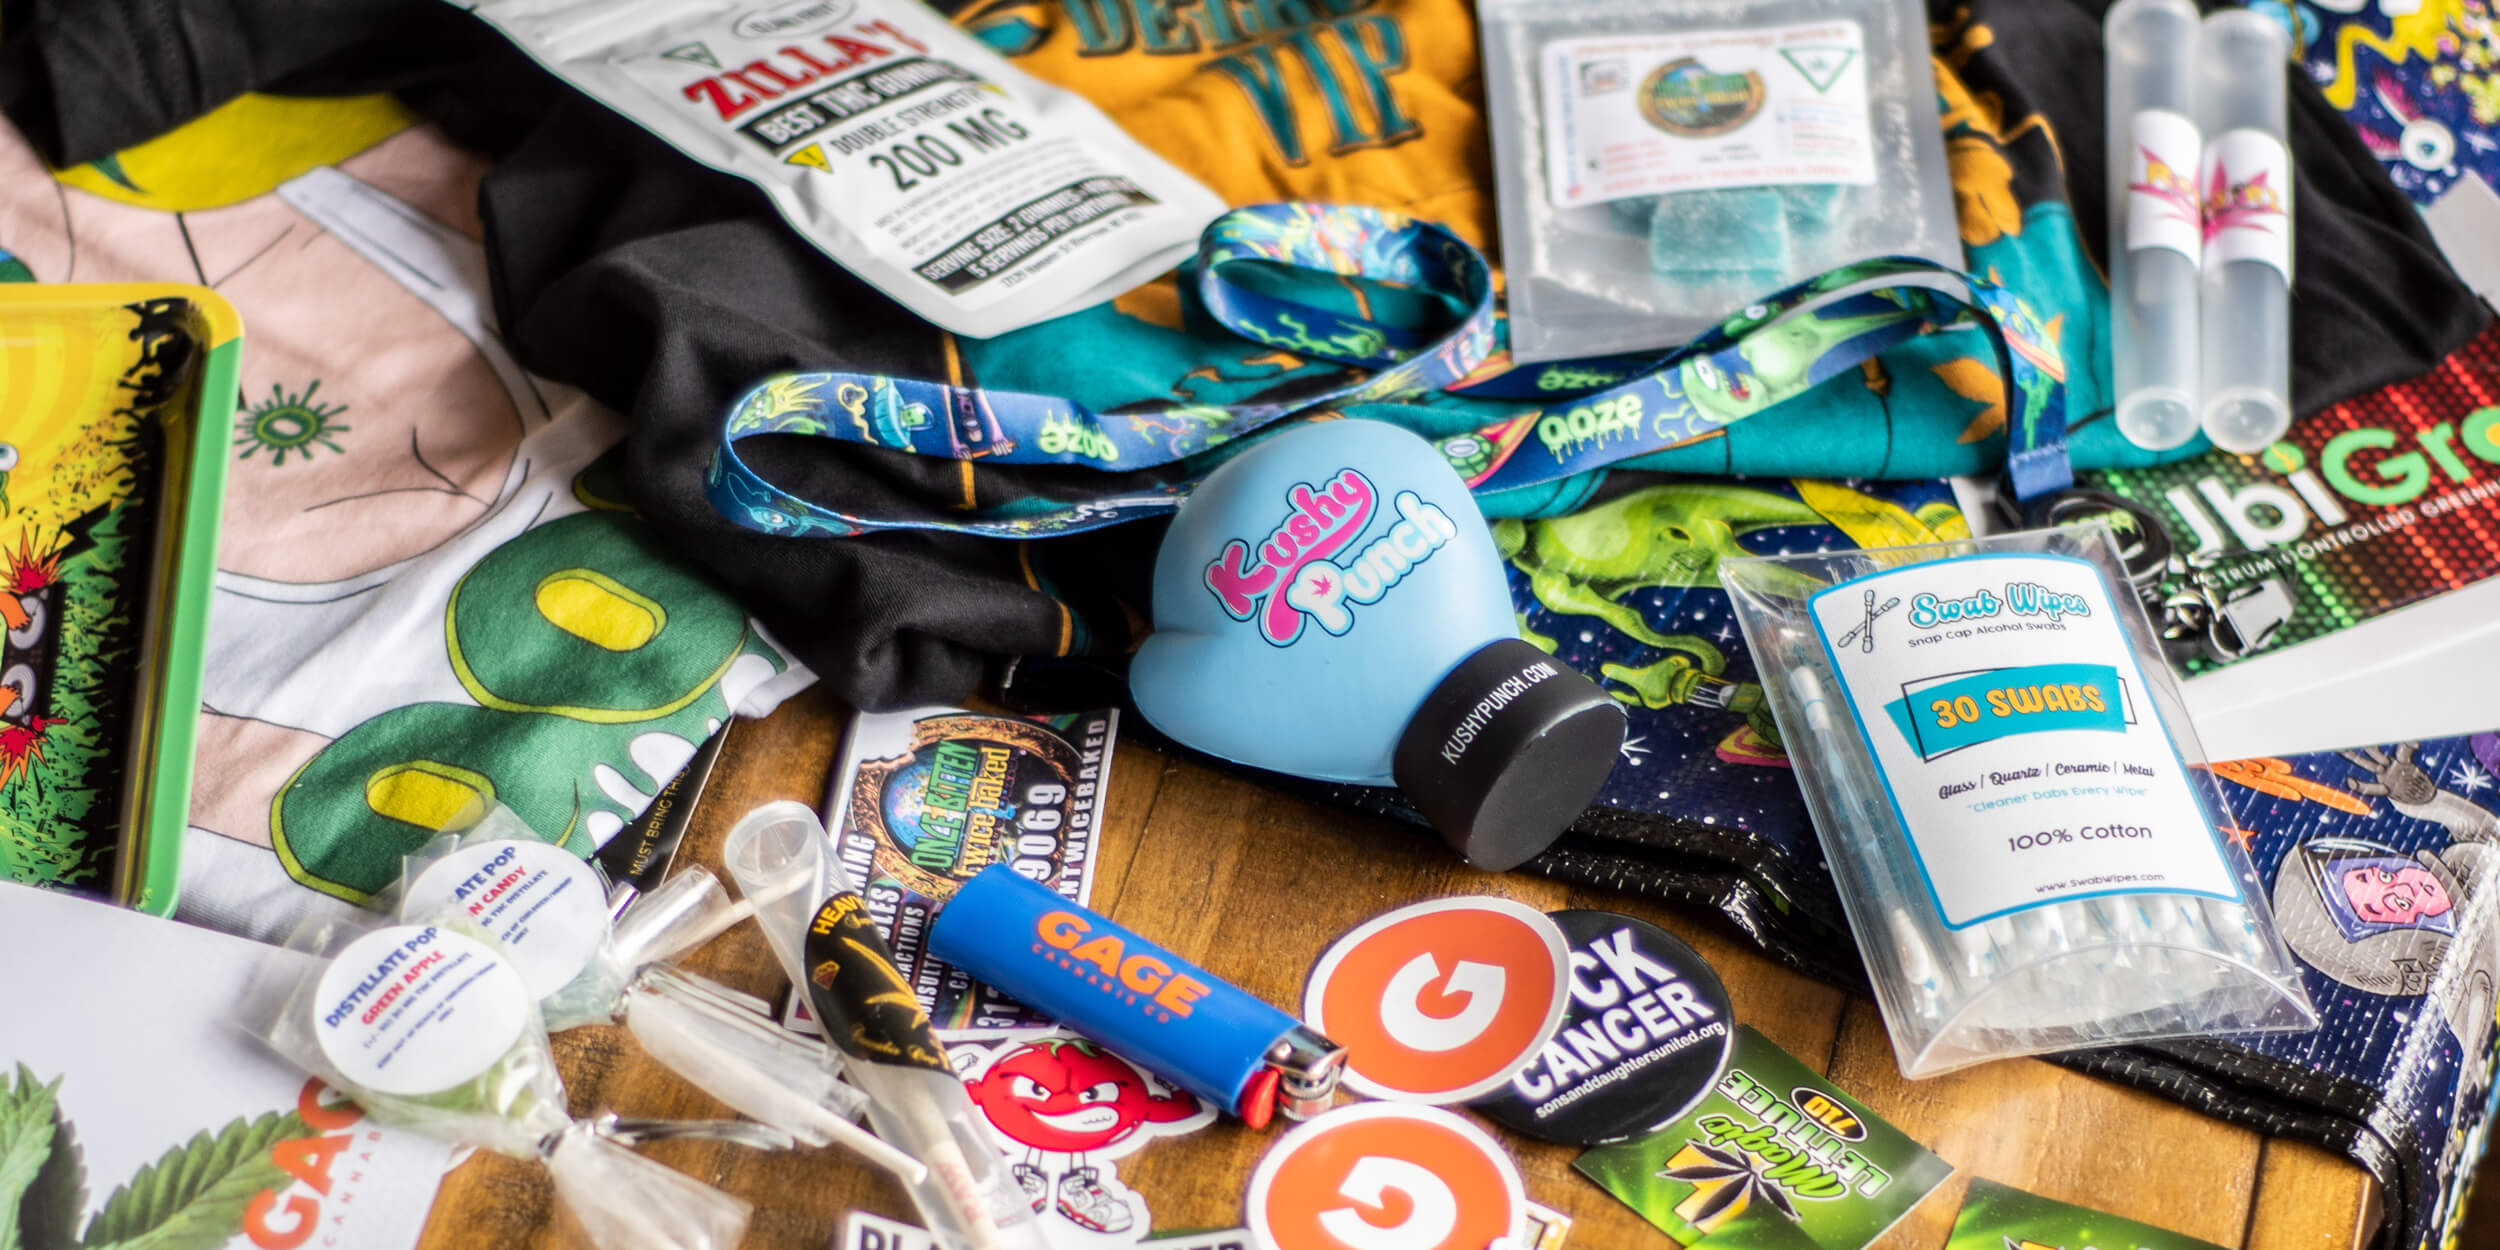 High Times Cannabis Cup Event Photo